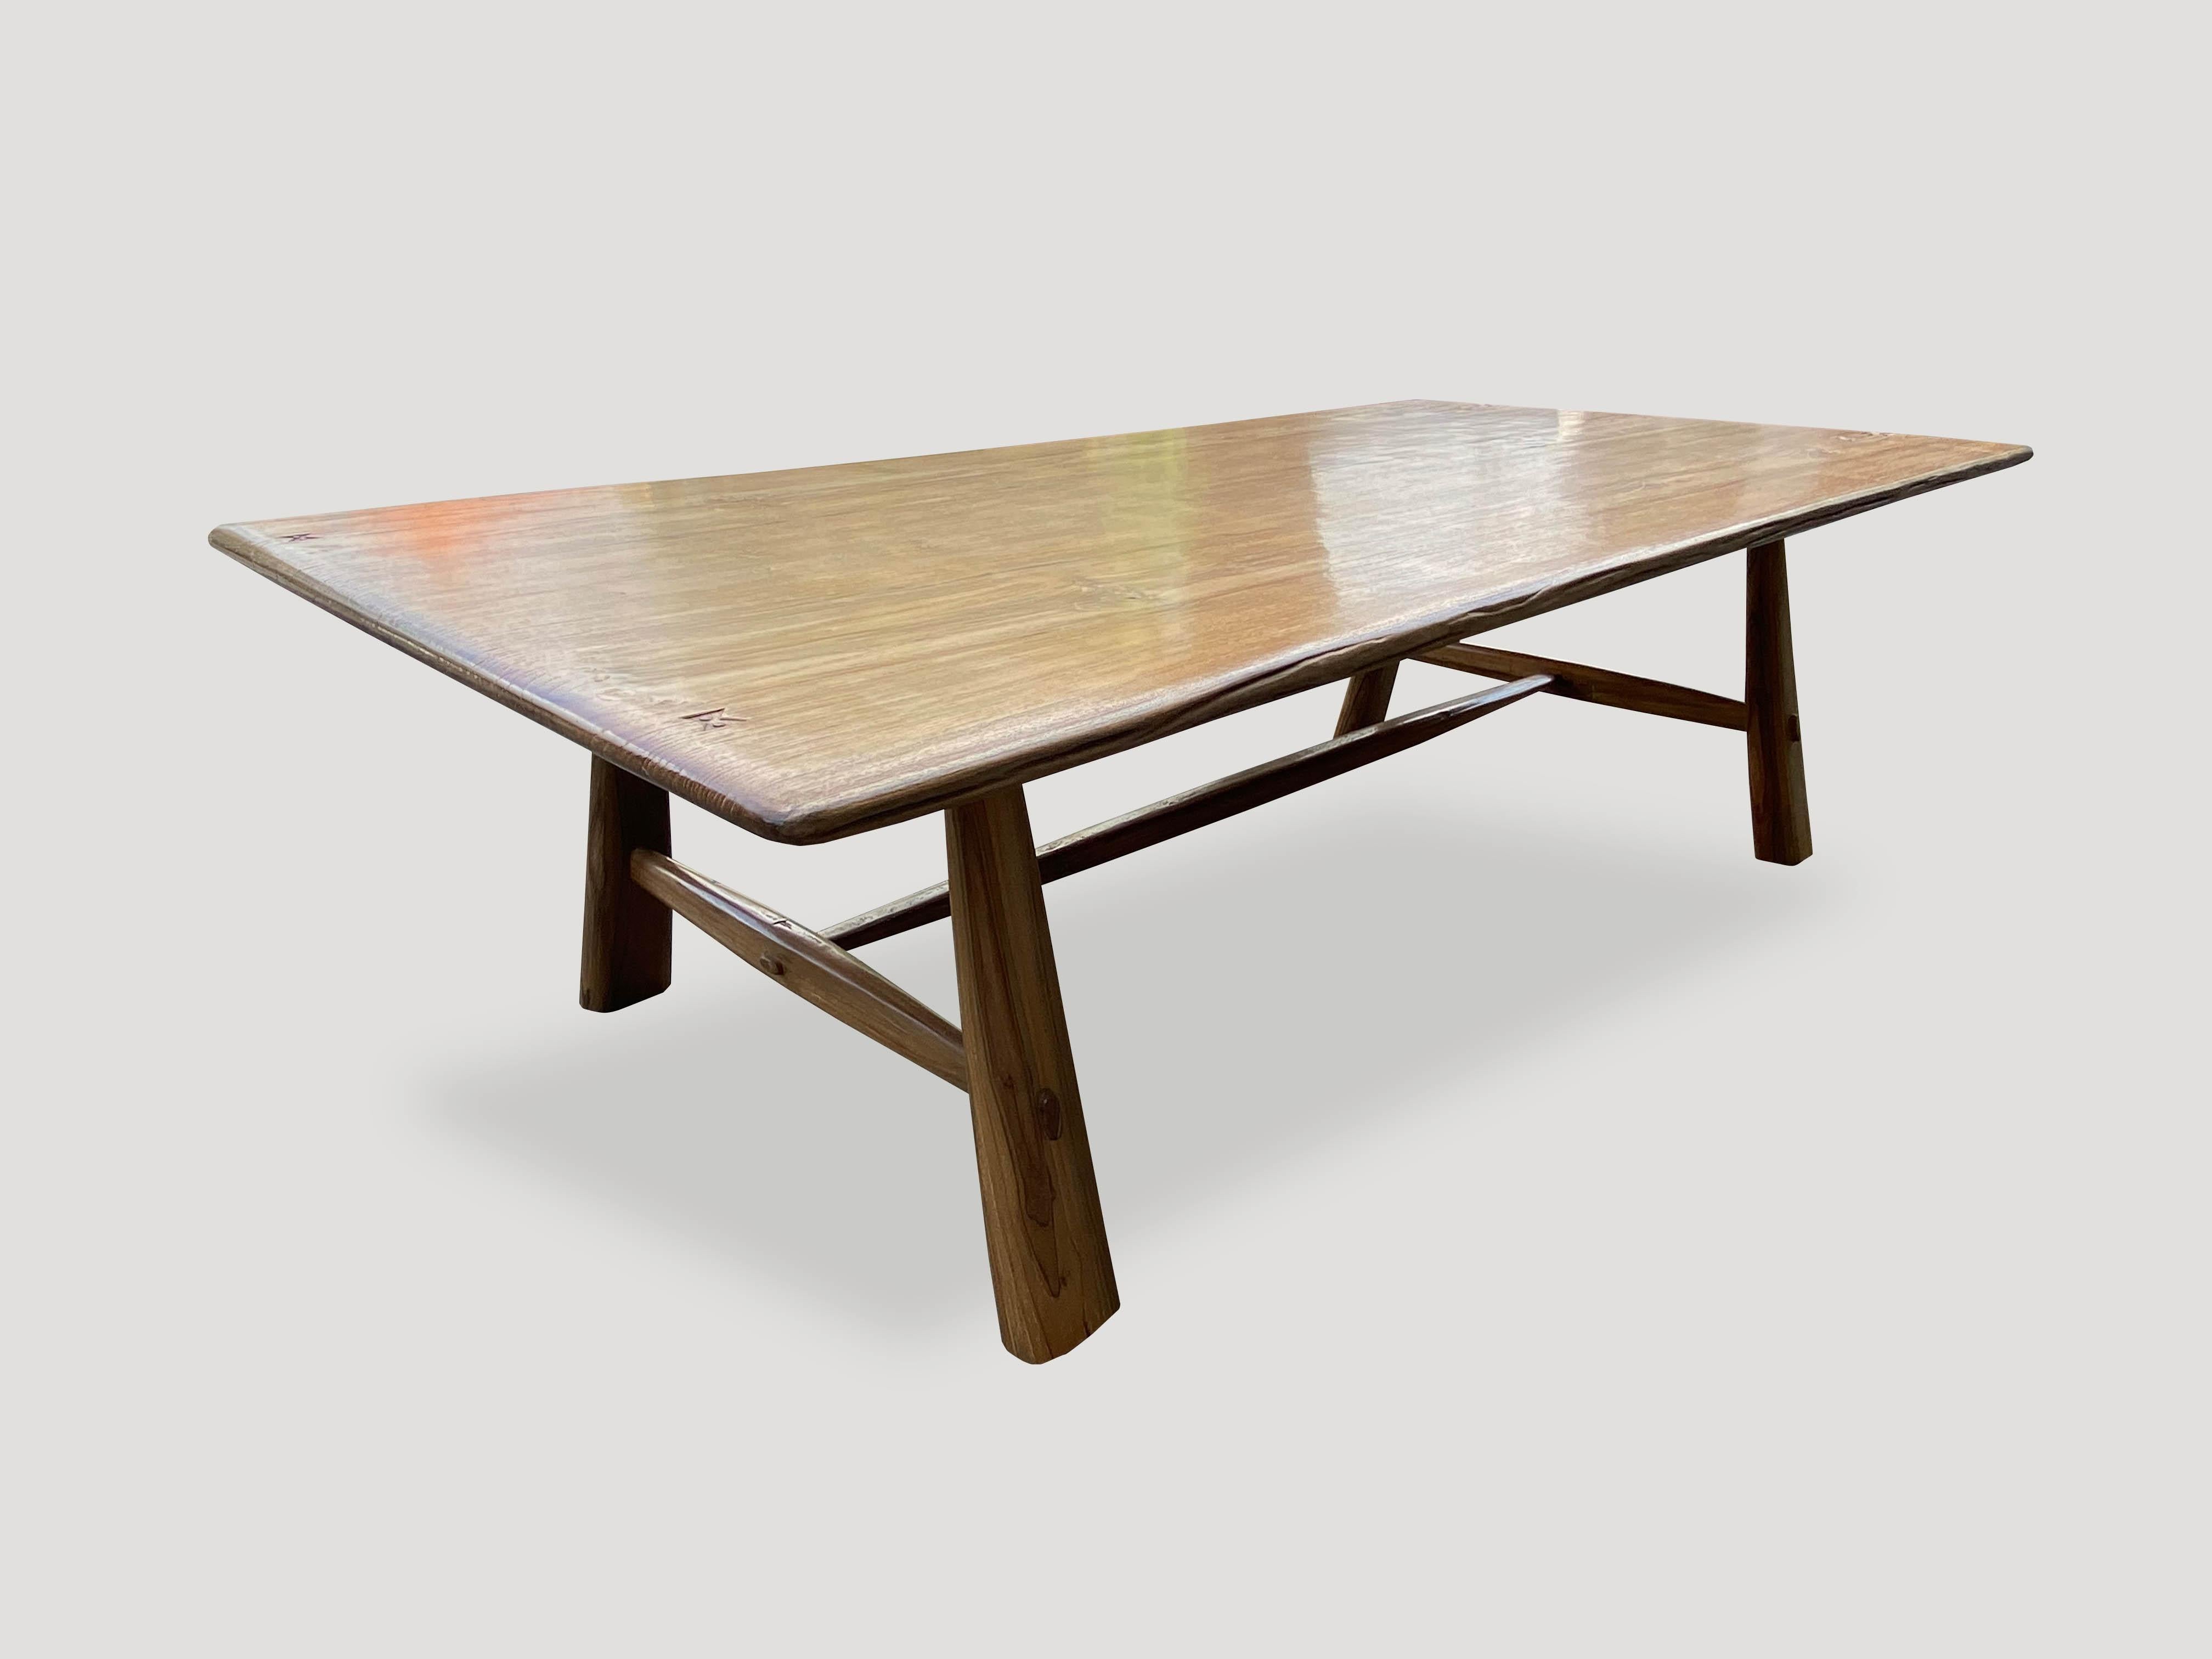 Andrianna Shamaris Midcentury Couture Teak Wood Dining Table For Sale 7